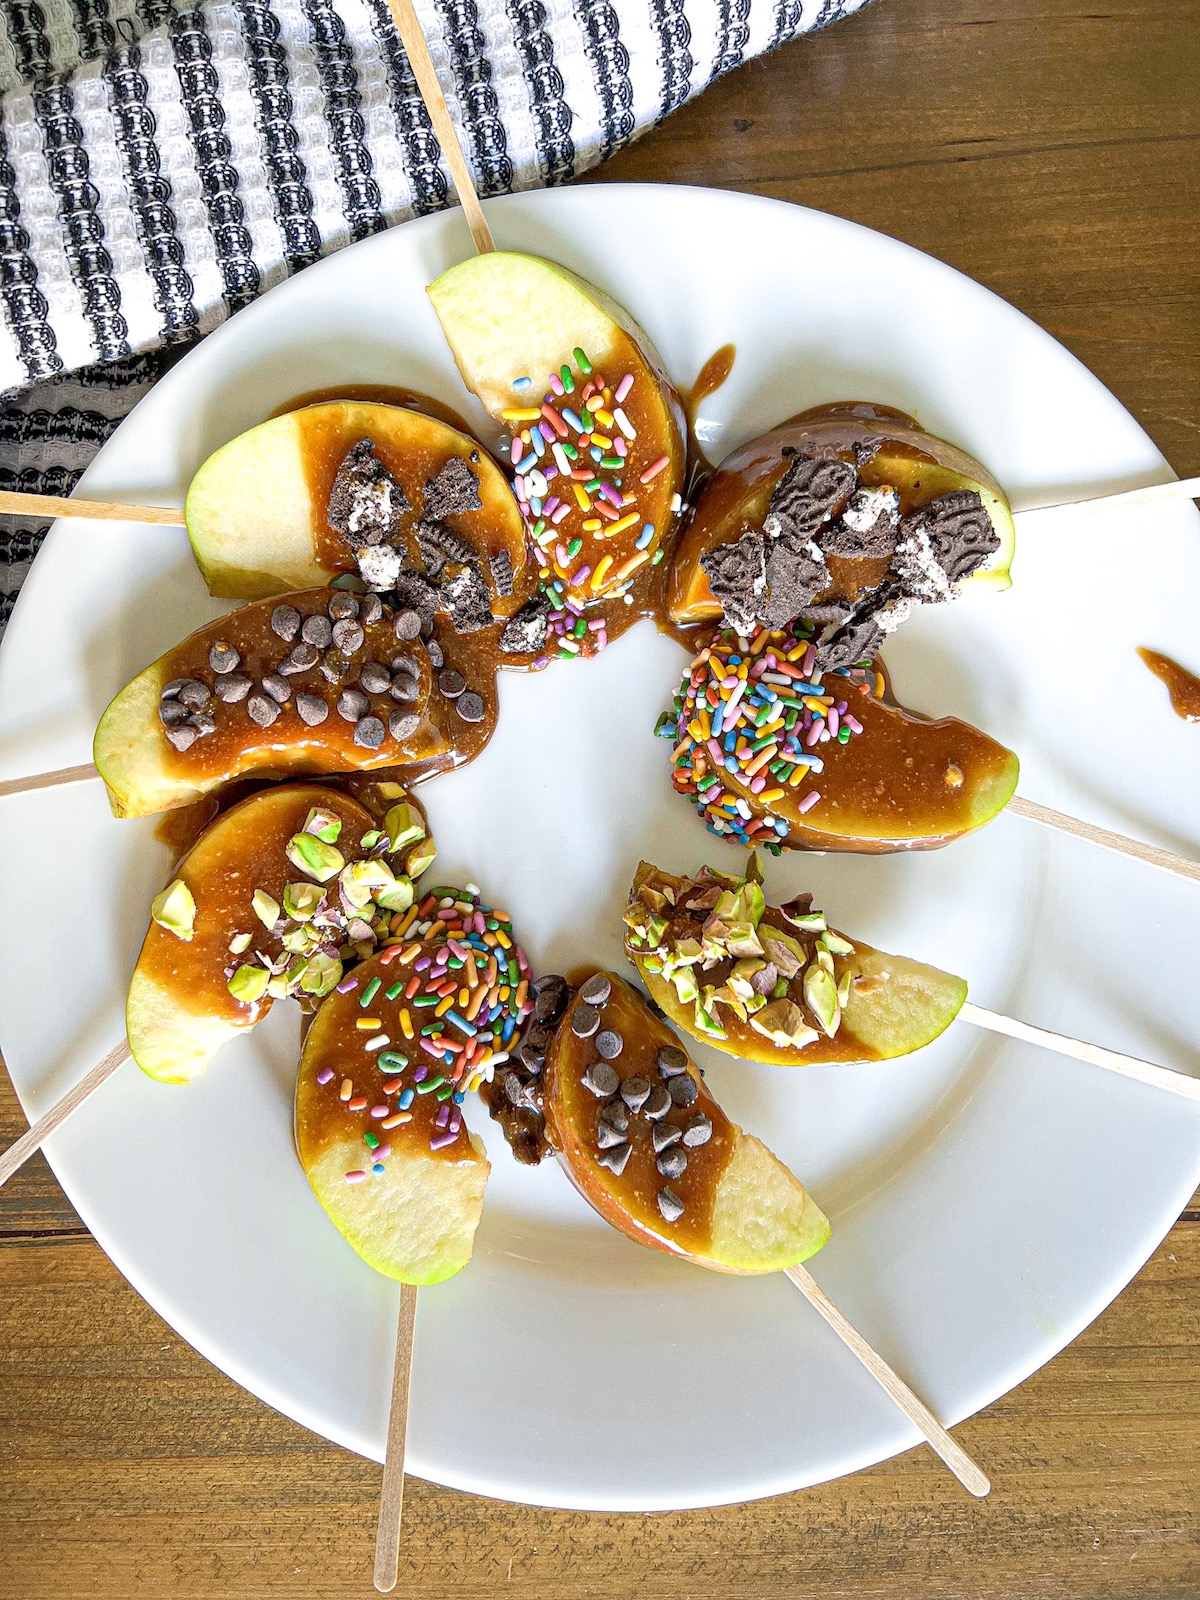 Caramel apple slices with various toppings arranged on a white plate